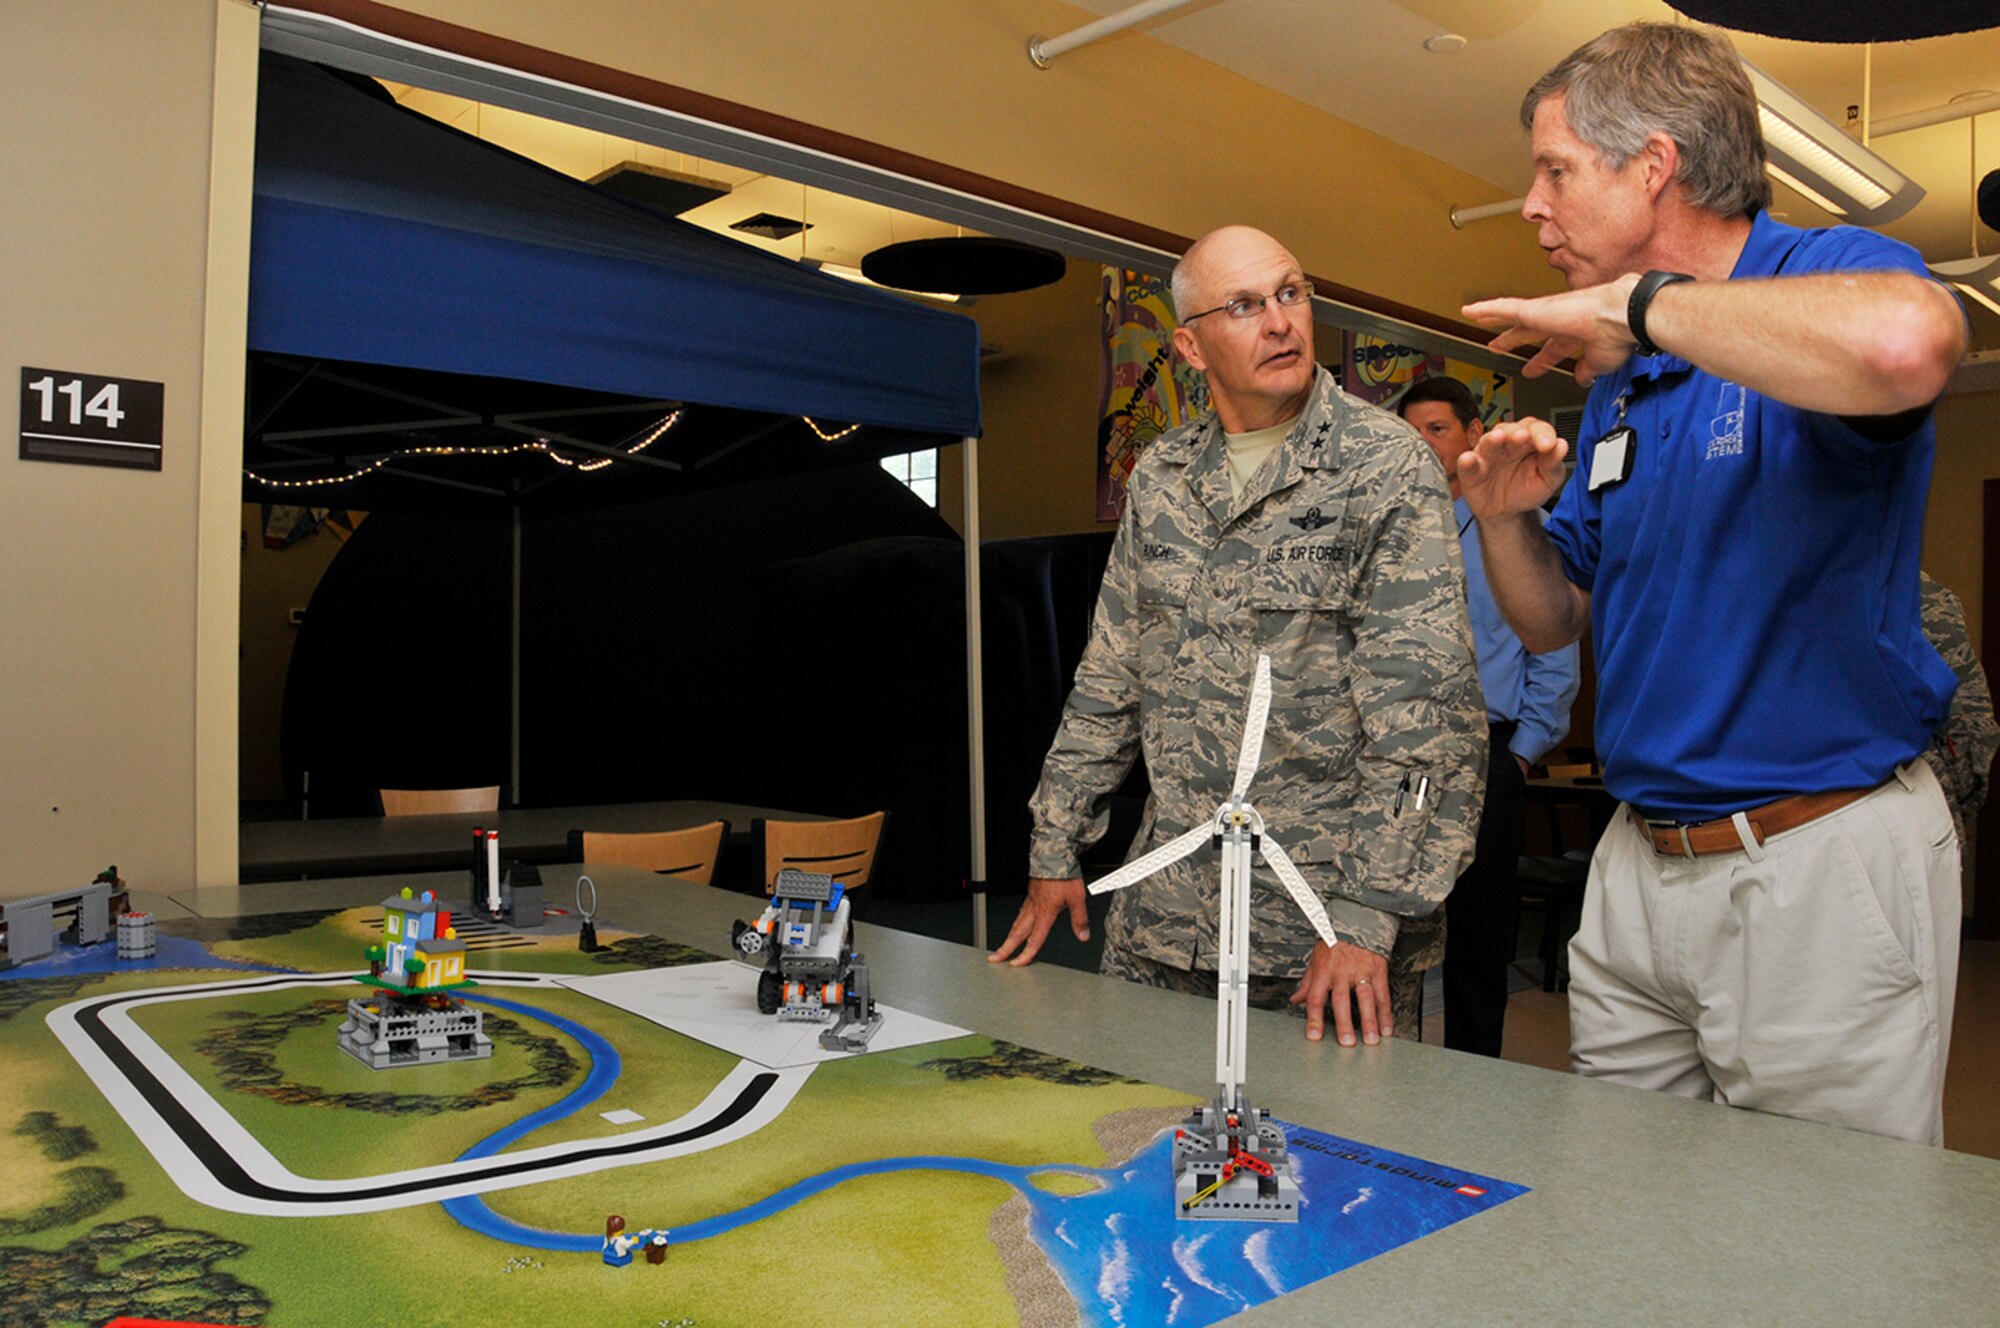 Maj. Gen. Arnold Bunch (left) learns about the STEM Center’s LEGO® robotics program from Jere Matty, STEM educational outreach specialist. (Photo by Rick Goodfriend)